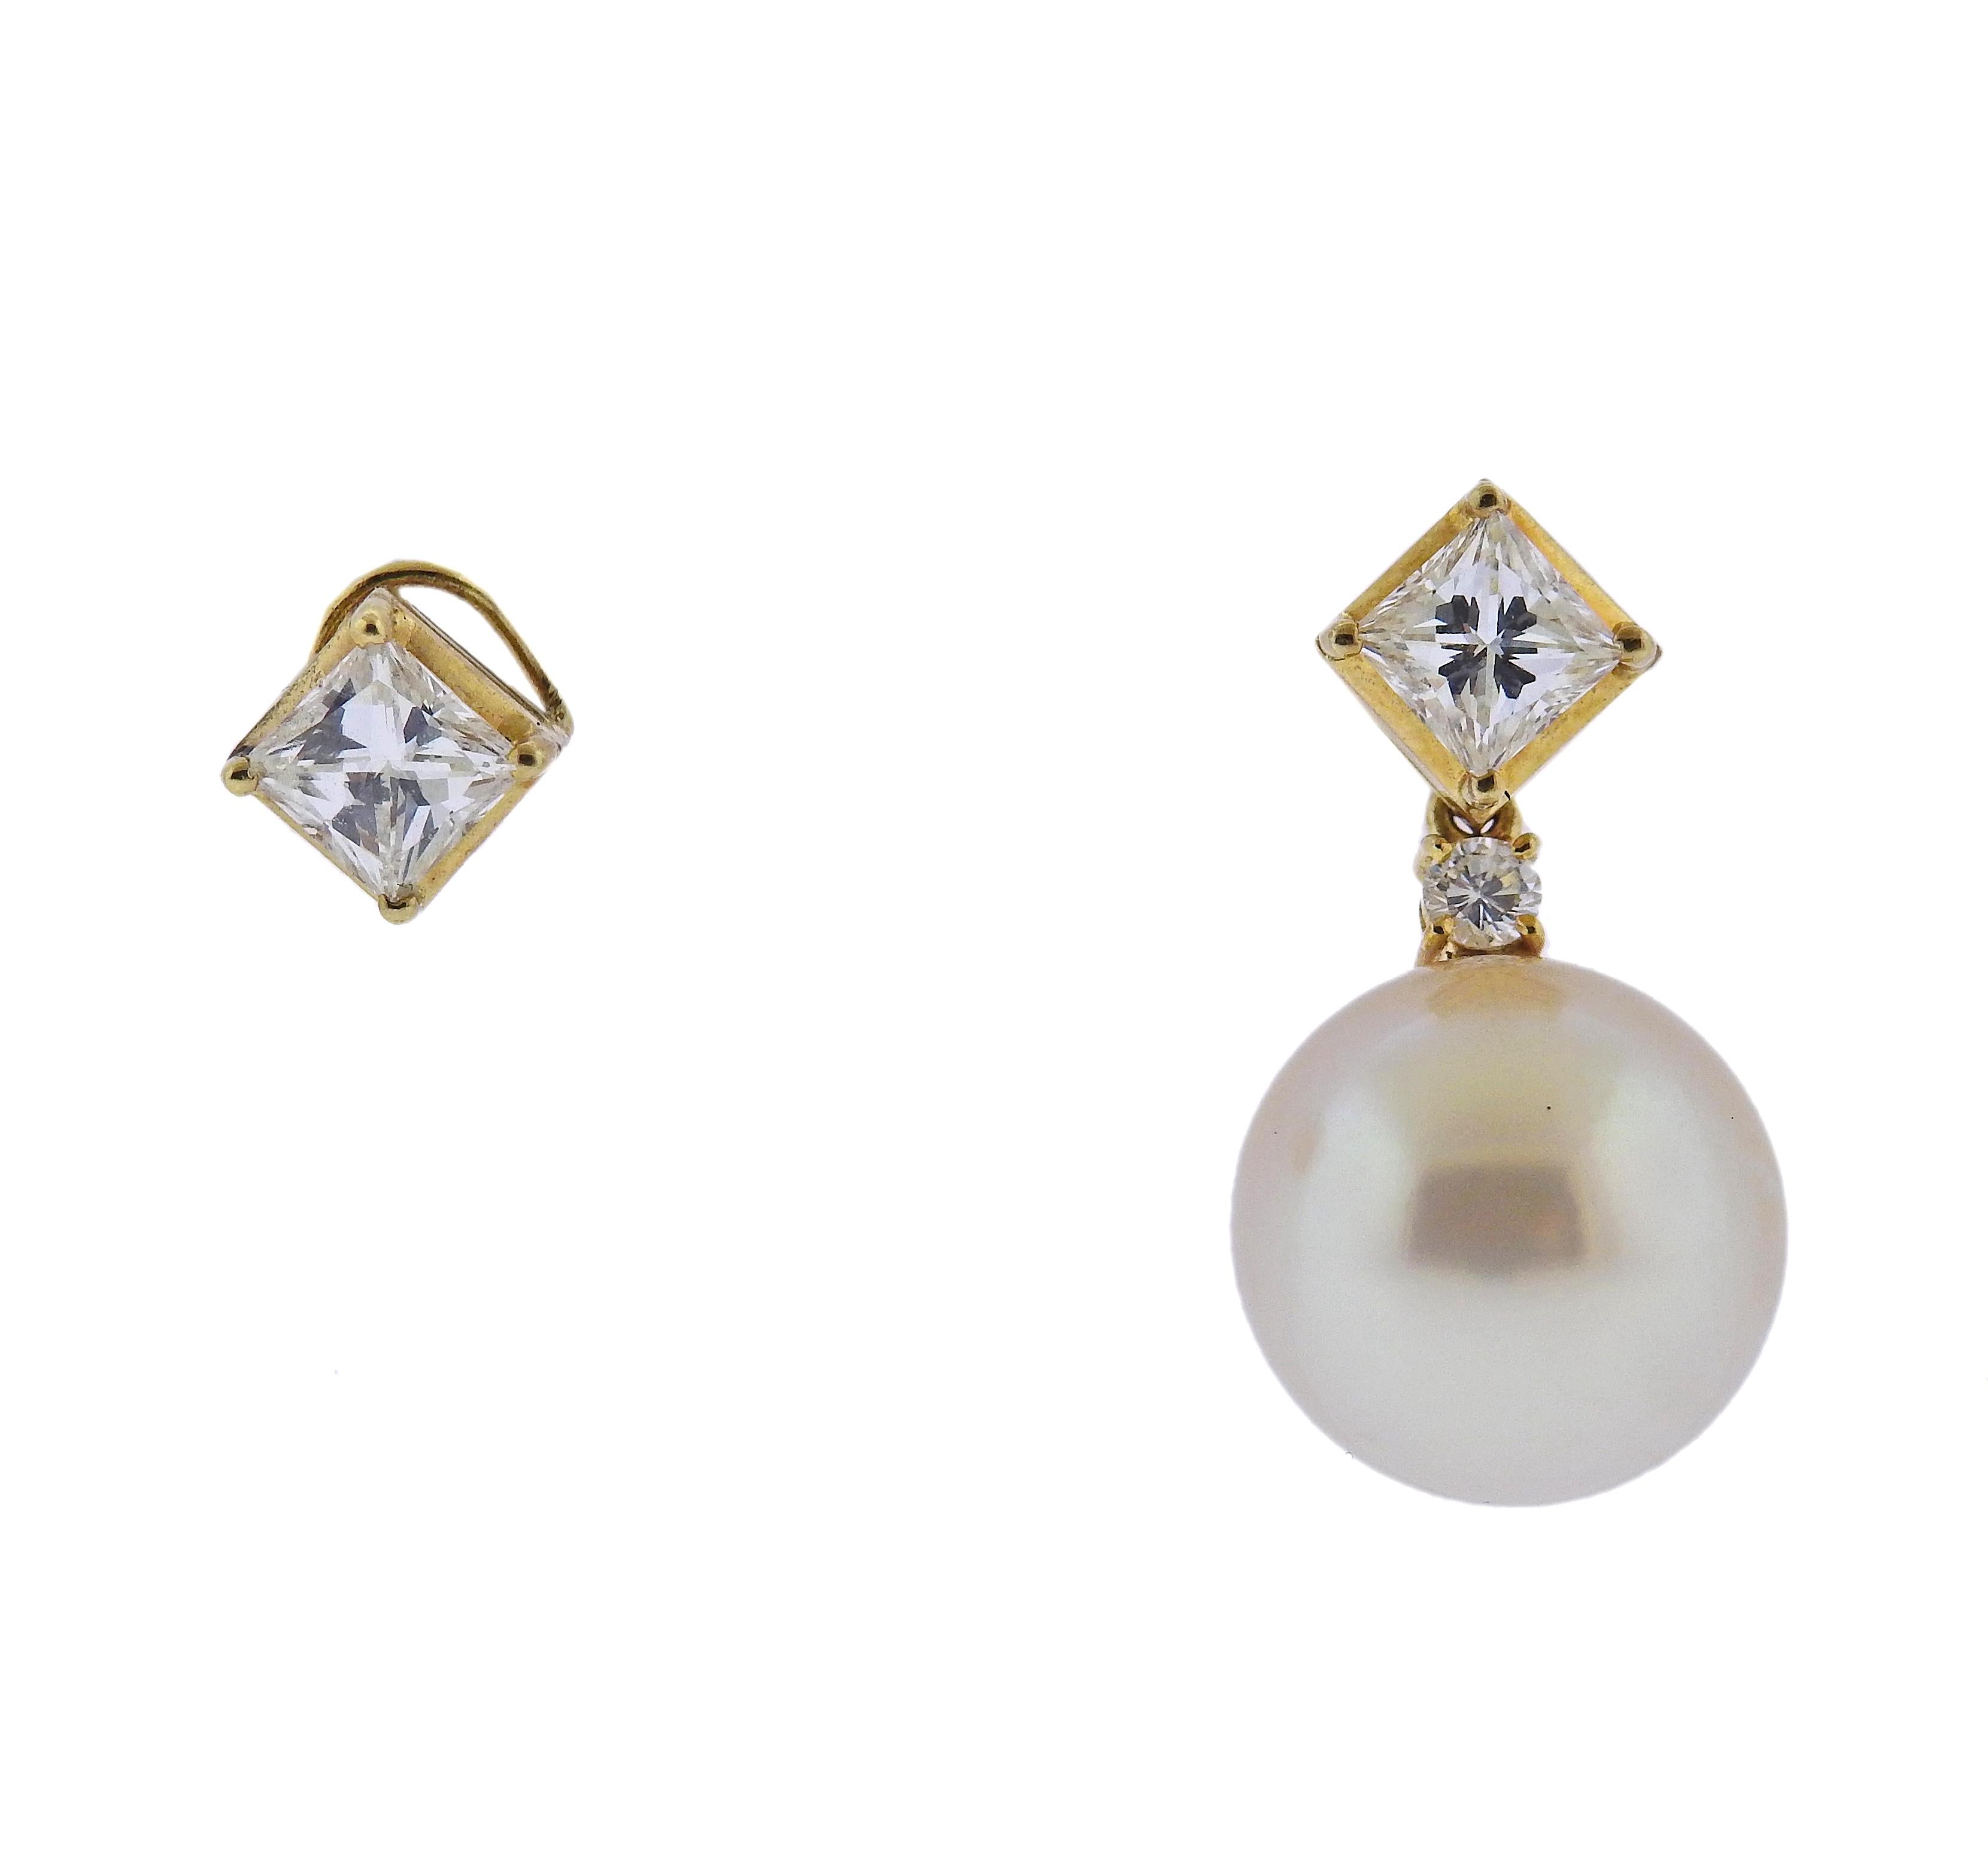 Pair of classic 18k gold night & day earrings, with detachable South Sea pearl drops. Earrings with drops are 26mm long. Without the drops - 6 x 6mm. South Sea pearls - 13.5mm in diameter, Diamonds approx. 0.70ct each, VS/GH, plus two smaller round